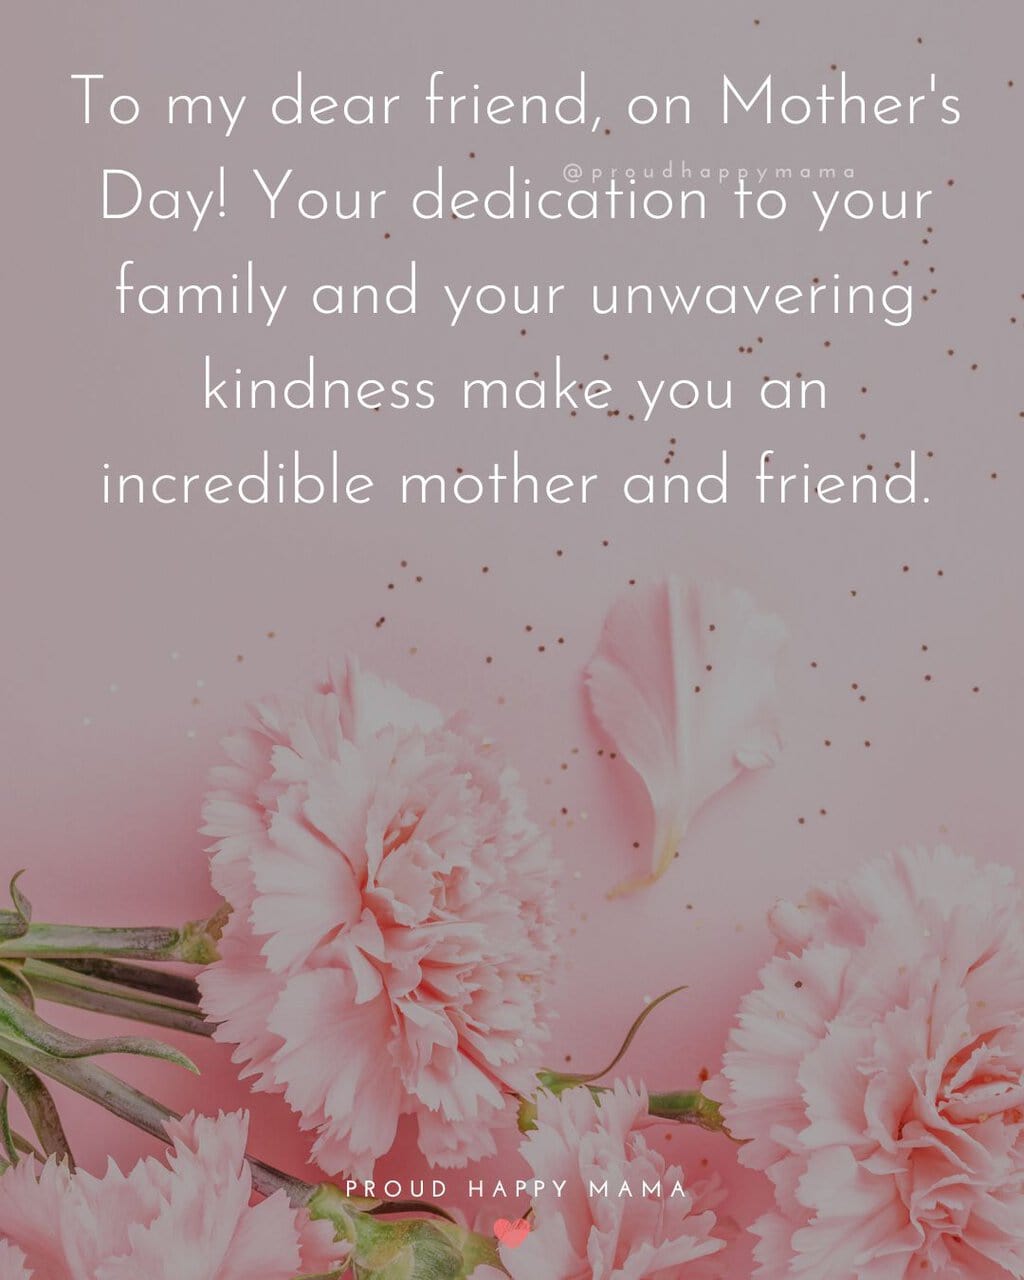 Inspirational Mother's Day Quotes For Friends